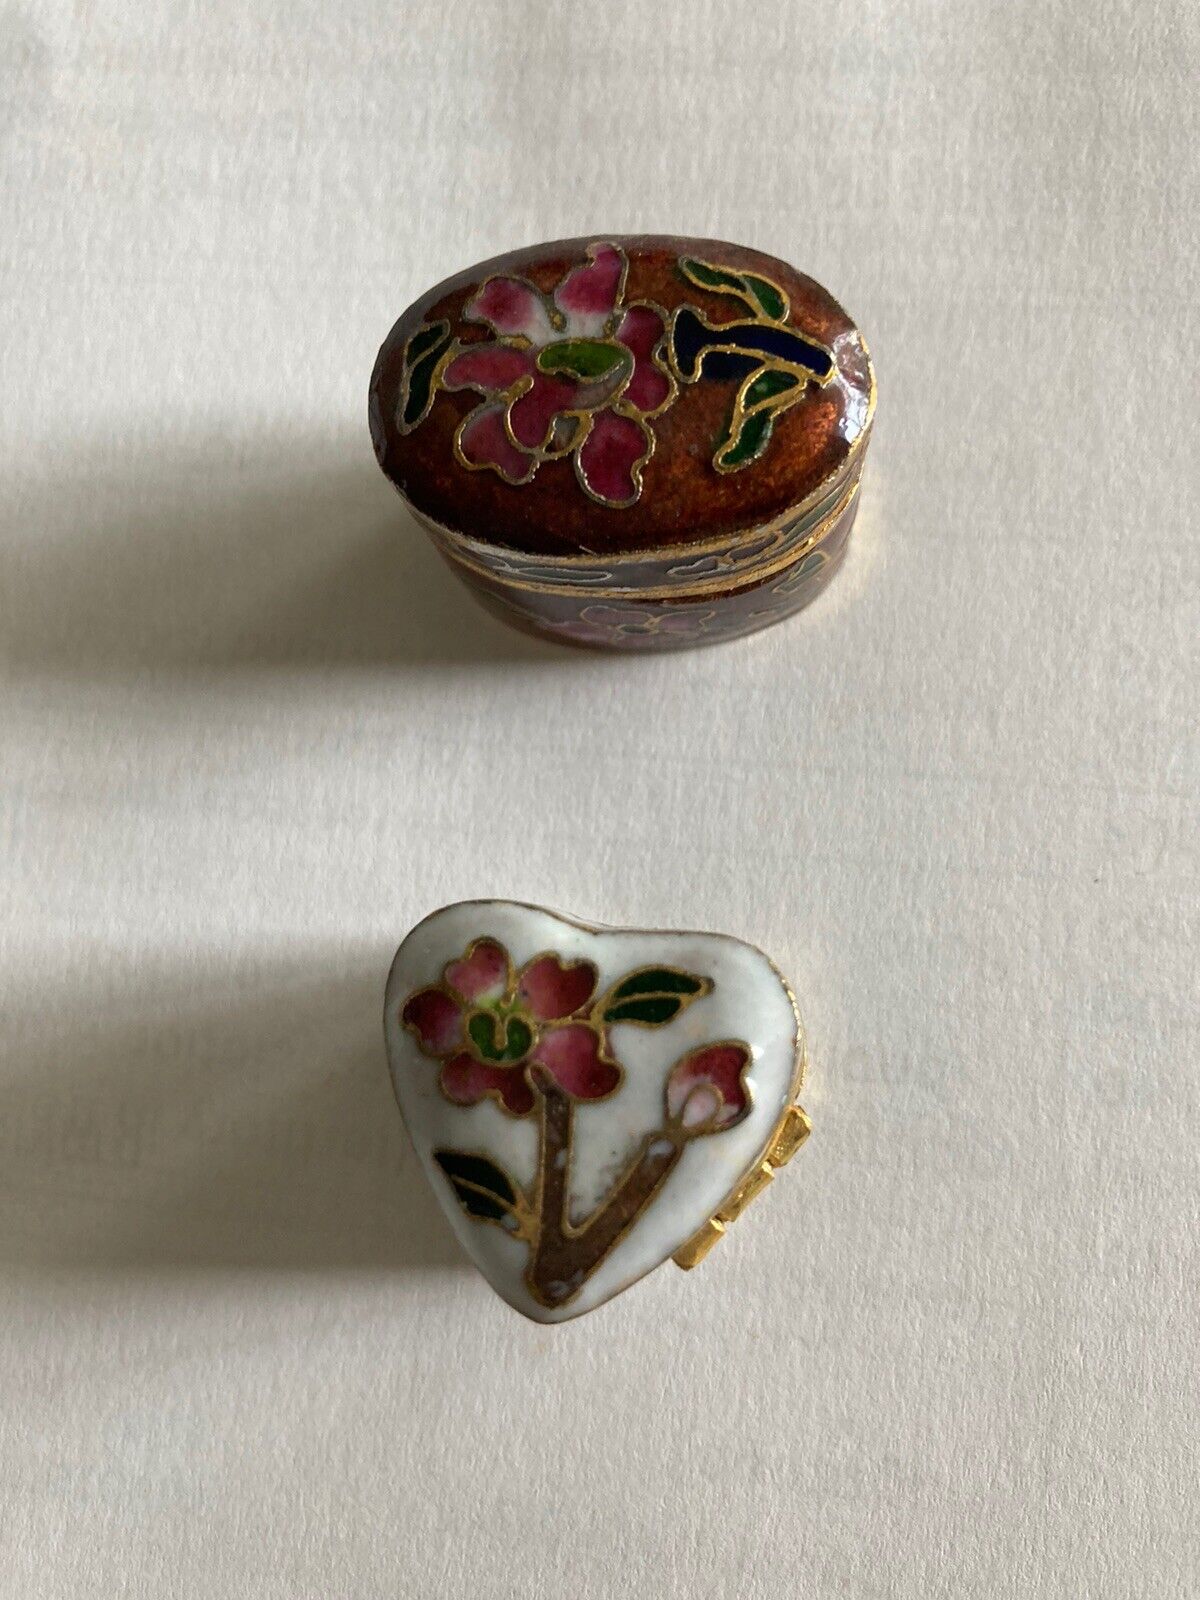 A SET OF 2 ENAMEL CLOISONNE MINIATURE PILL BOXES. TRINKETS/JEWELRY/COLLECTIBLES.